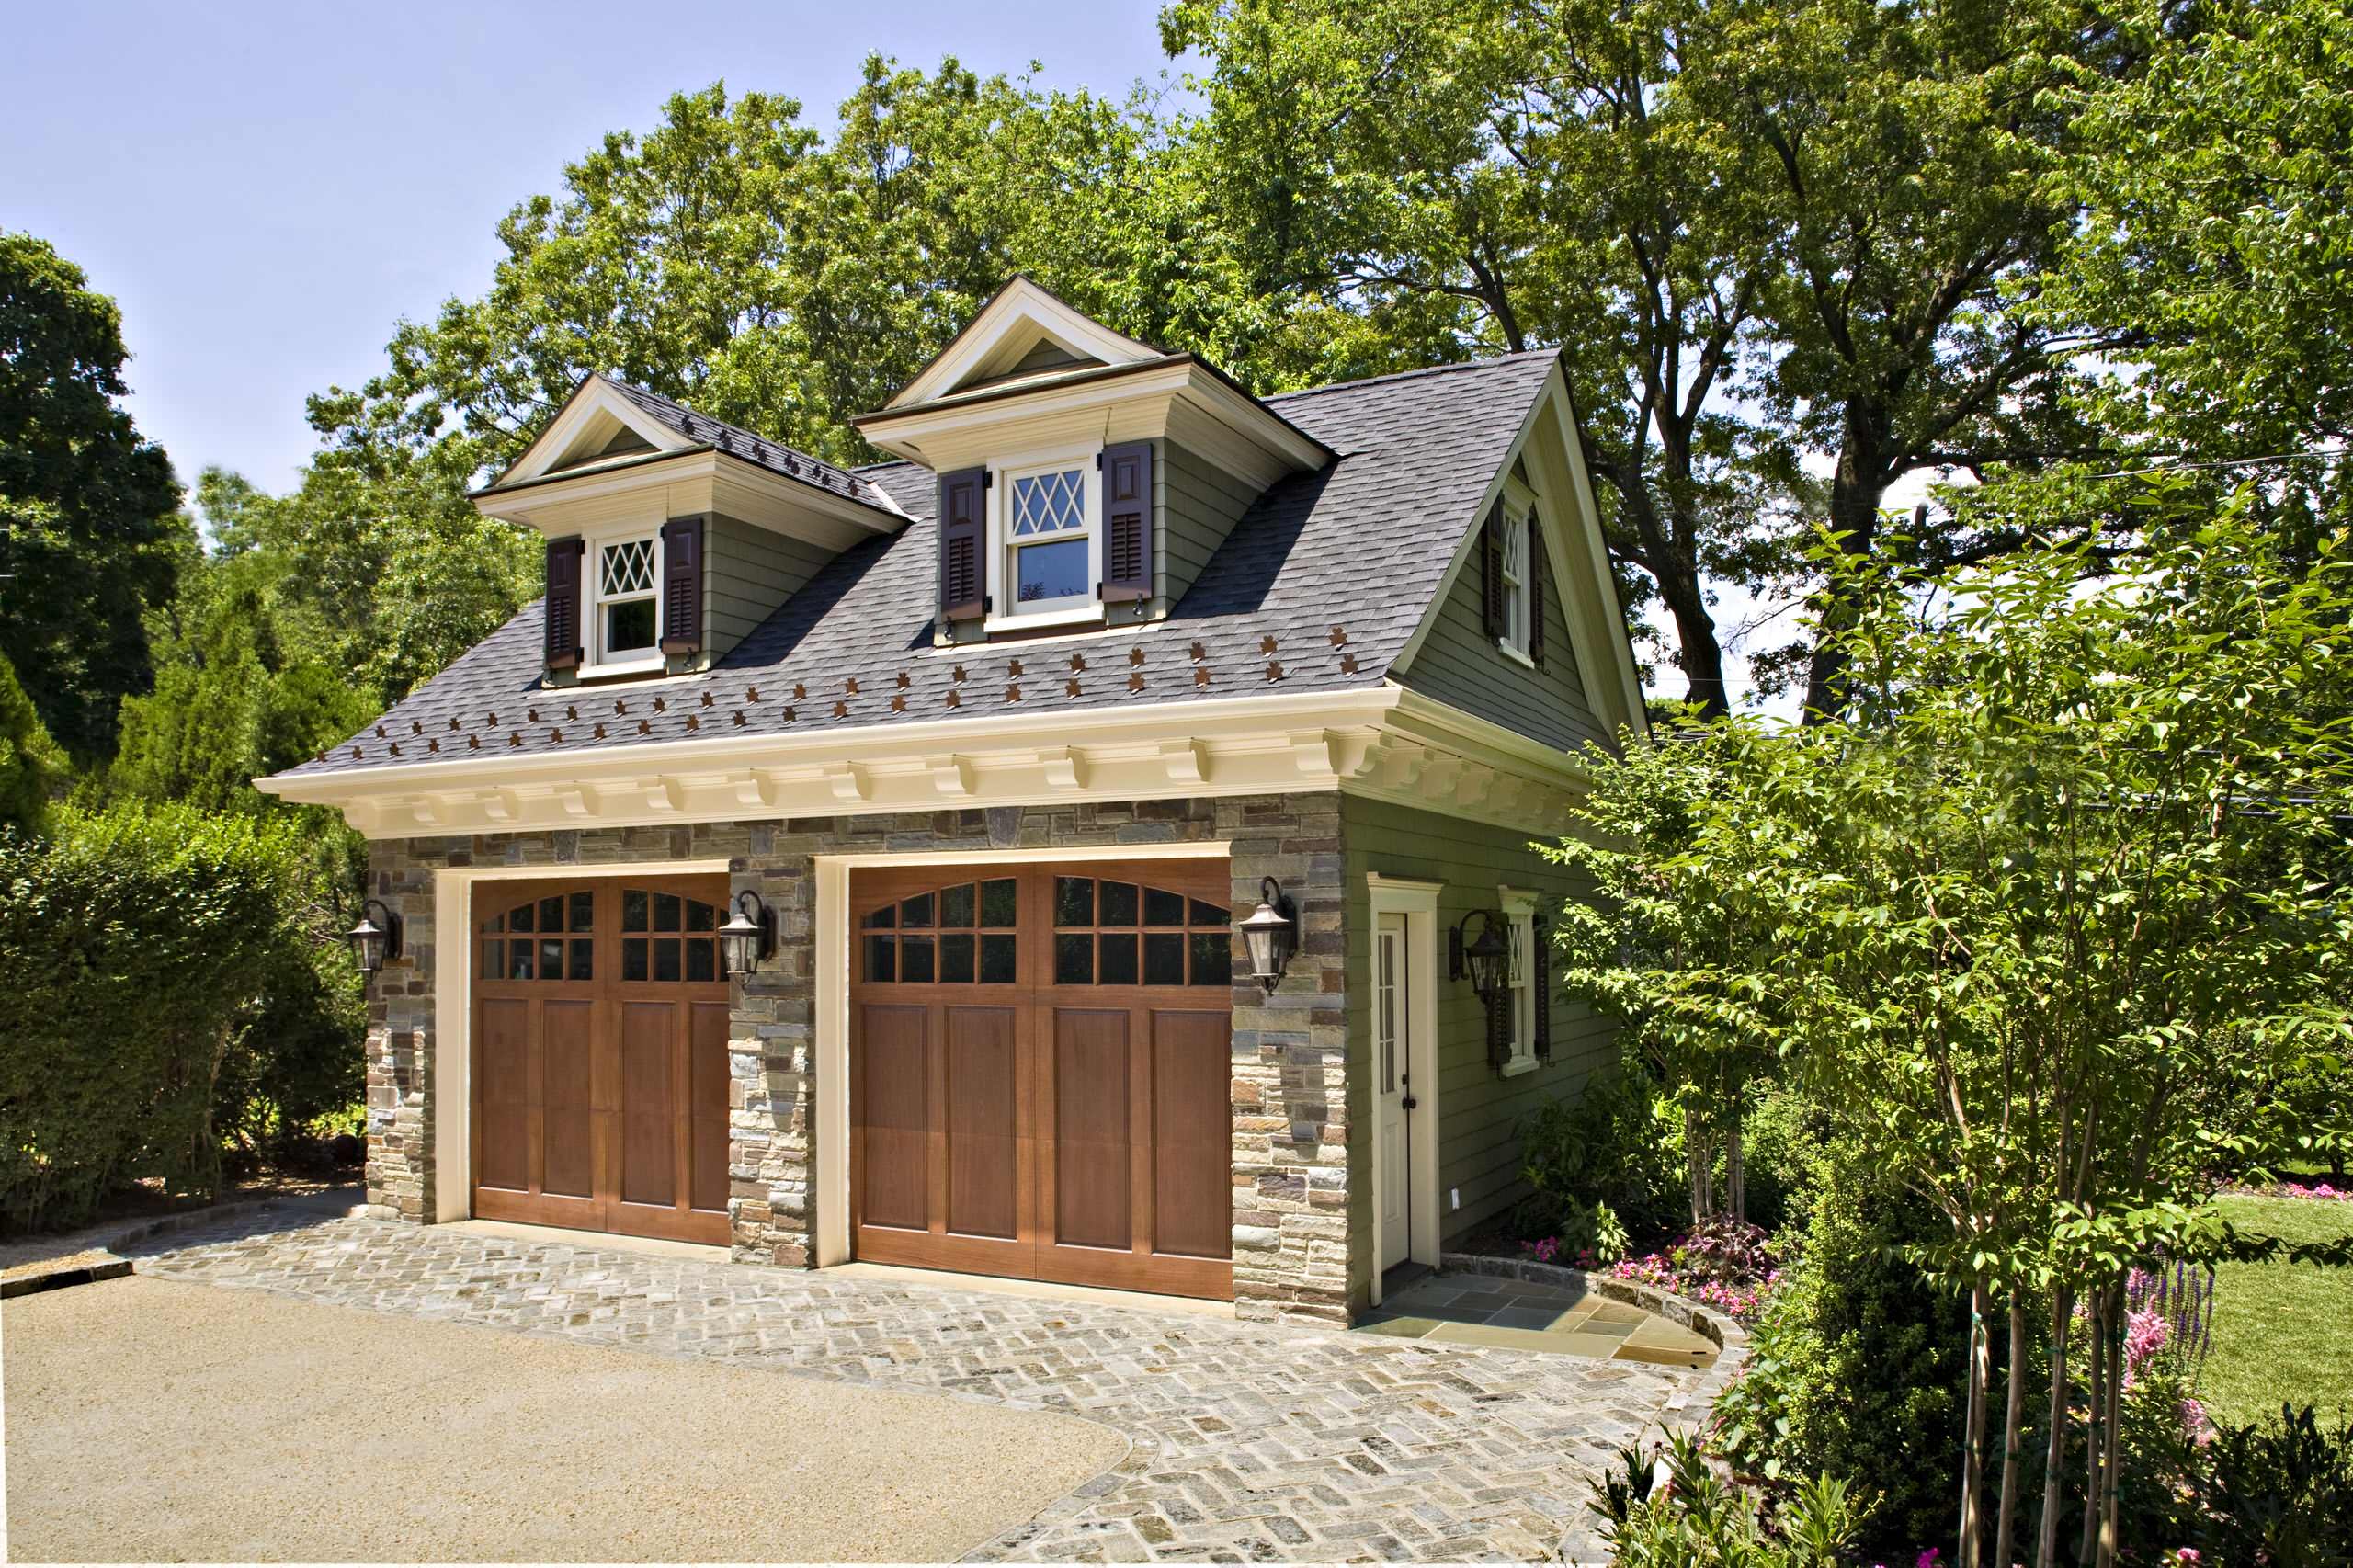 75 Beautiful Traditional Two Car Garage Pictures Ideas March 2021 Houzz